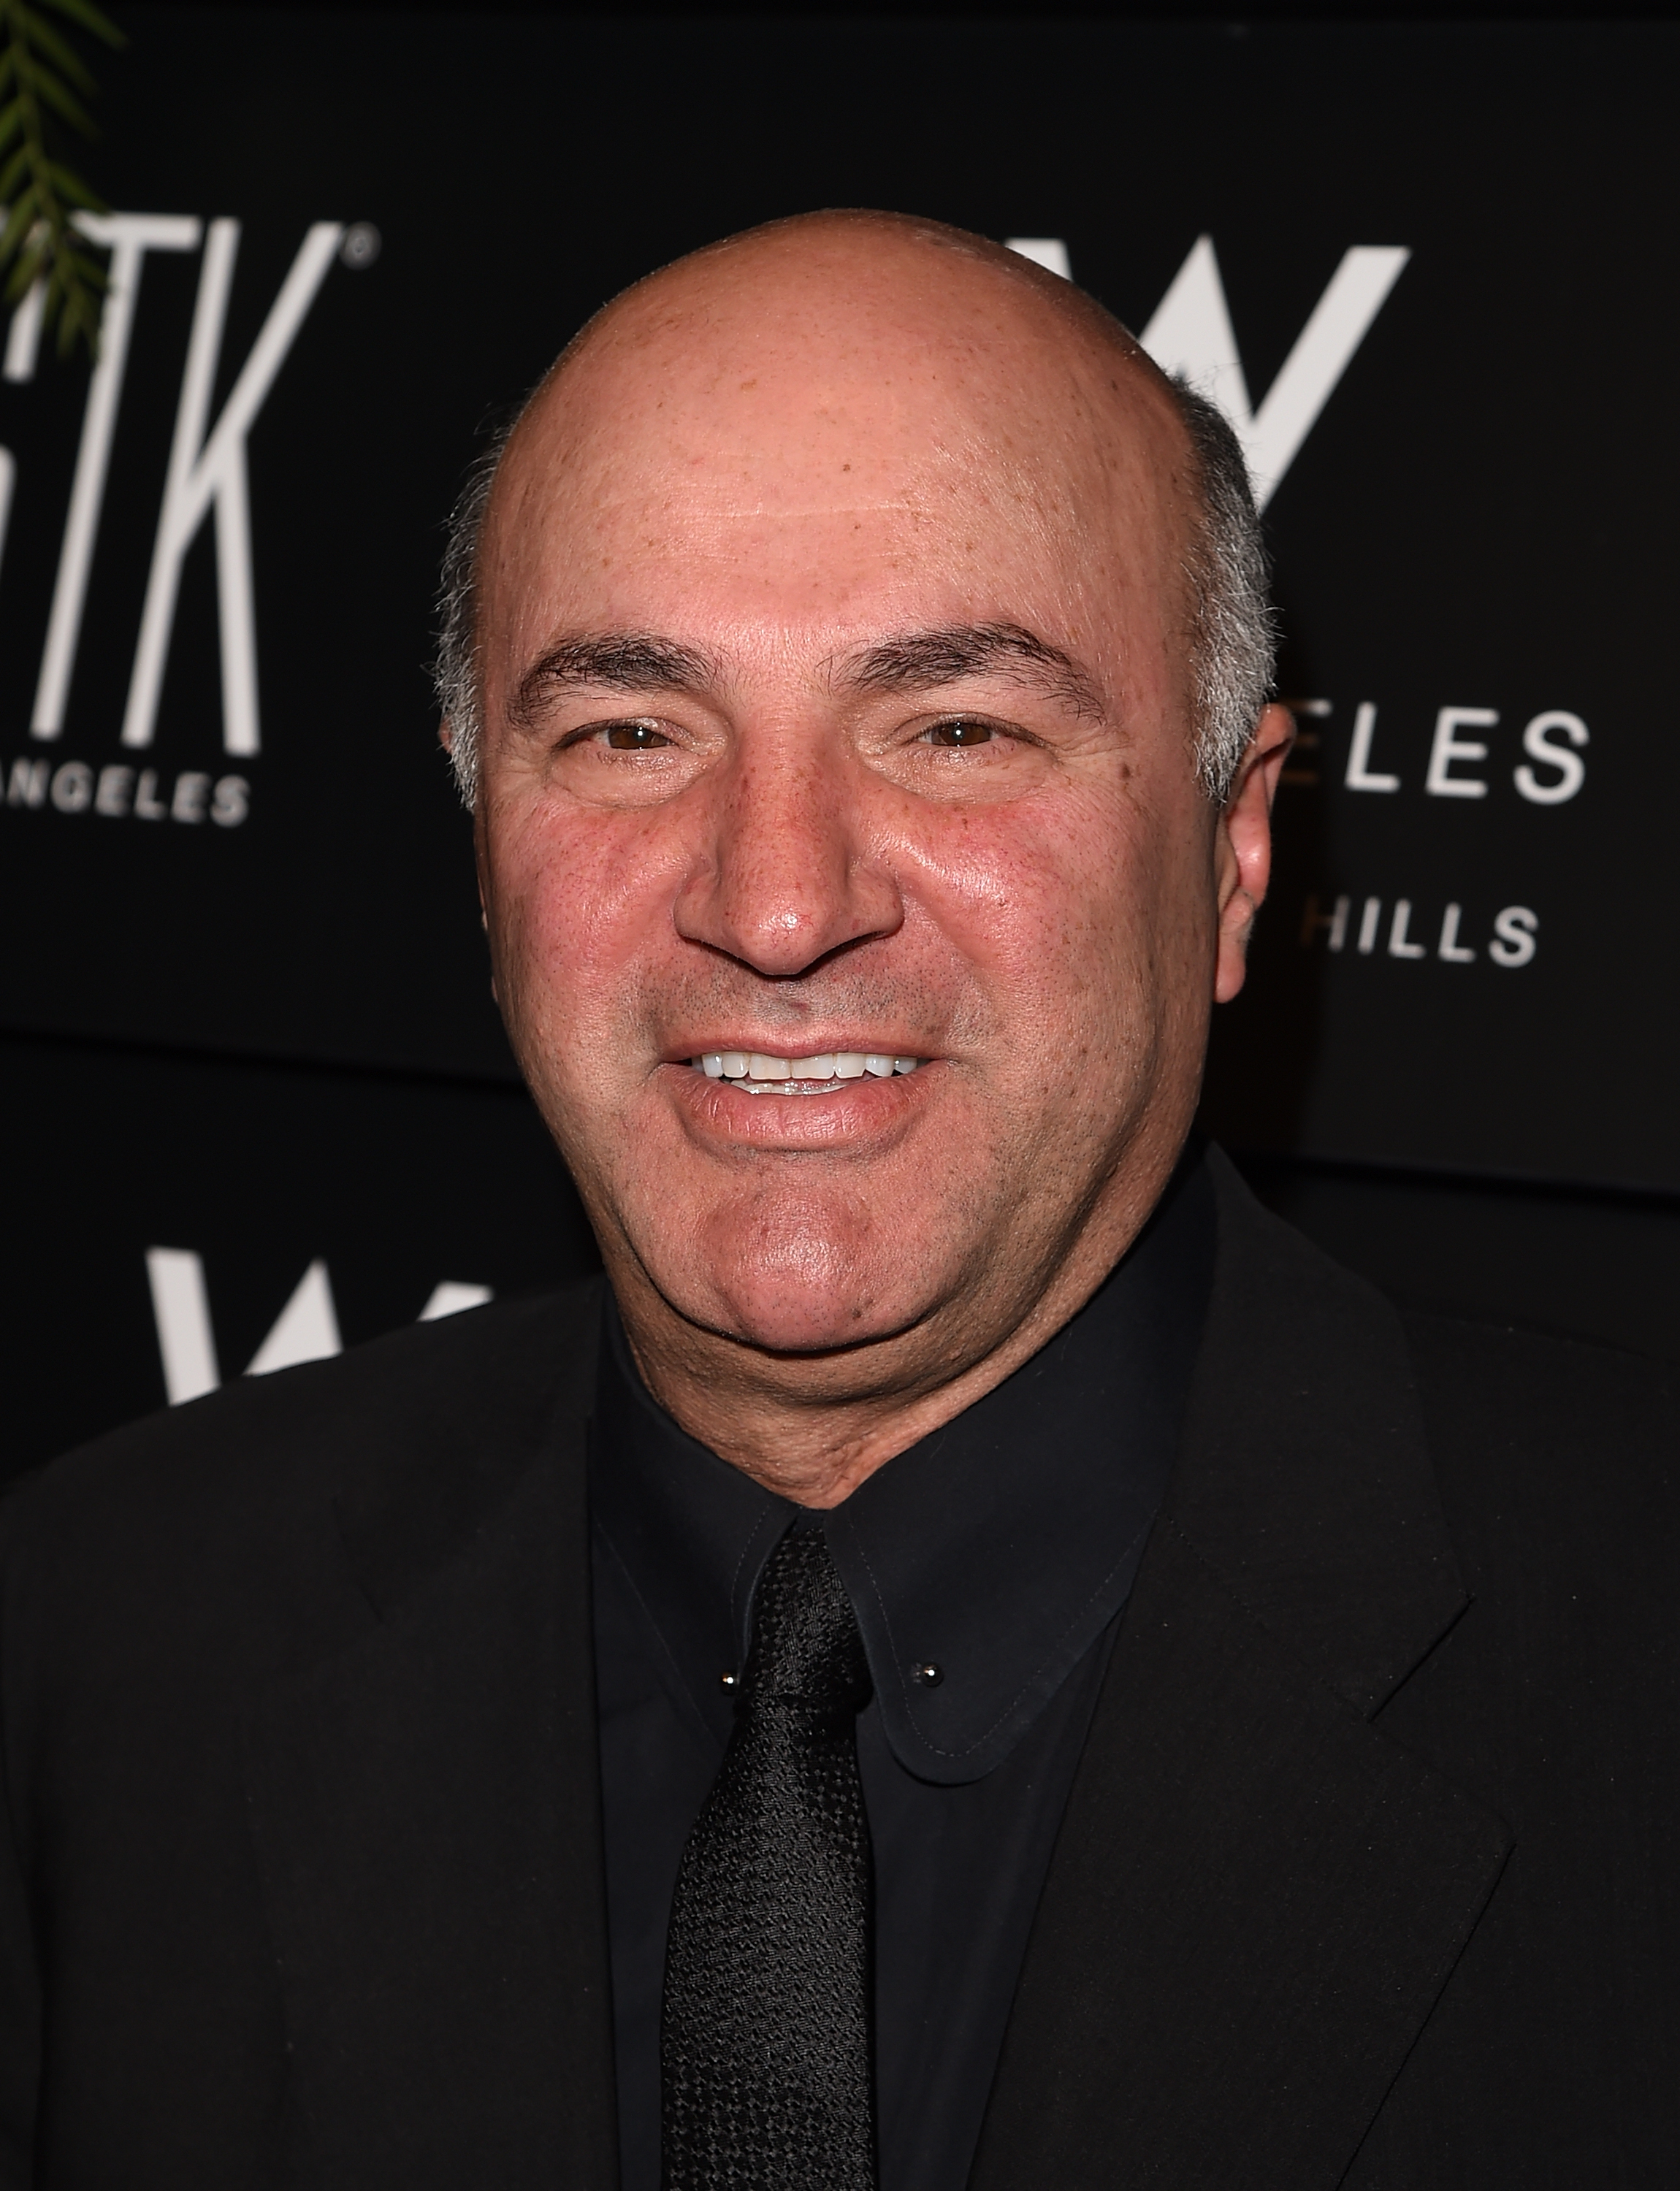 Kevin O’Leary Net Worth 5 Fast Facts You Need to Know